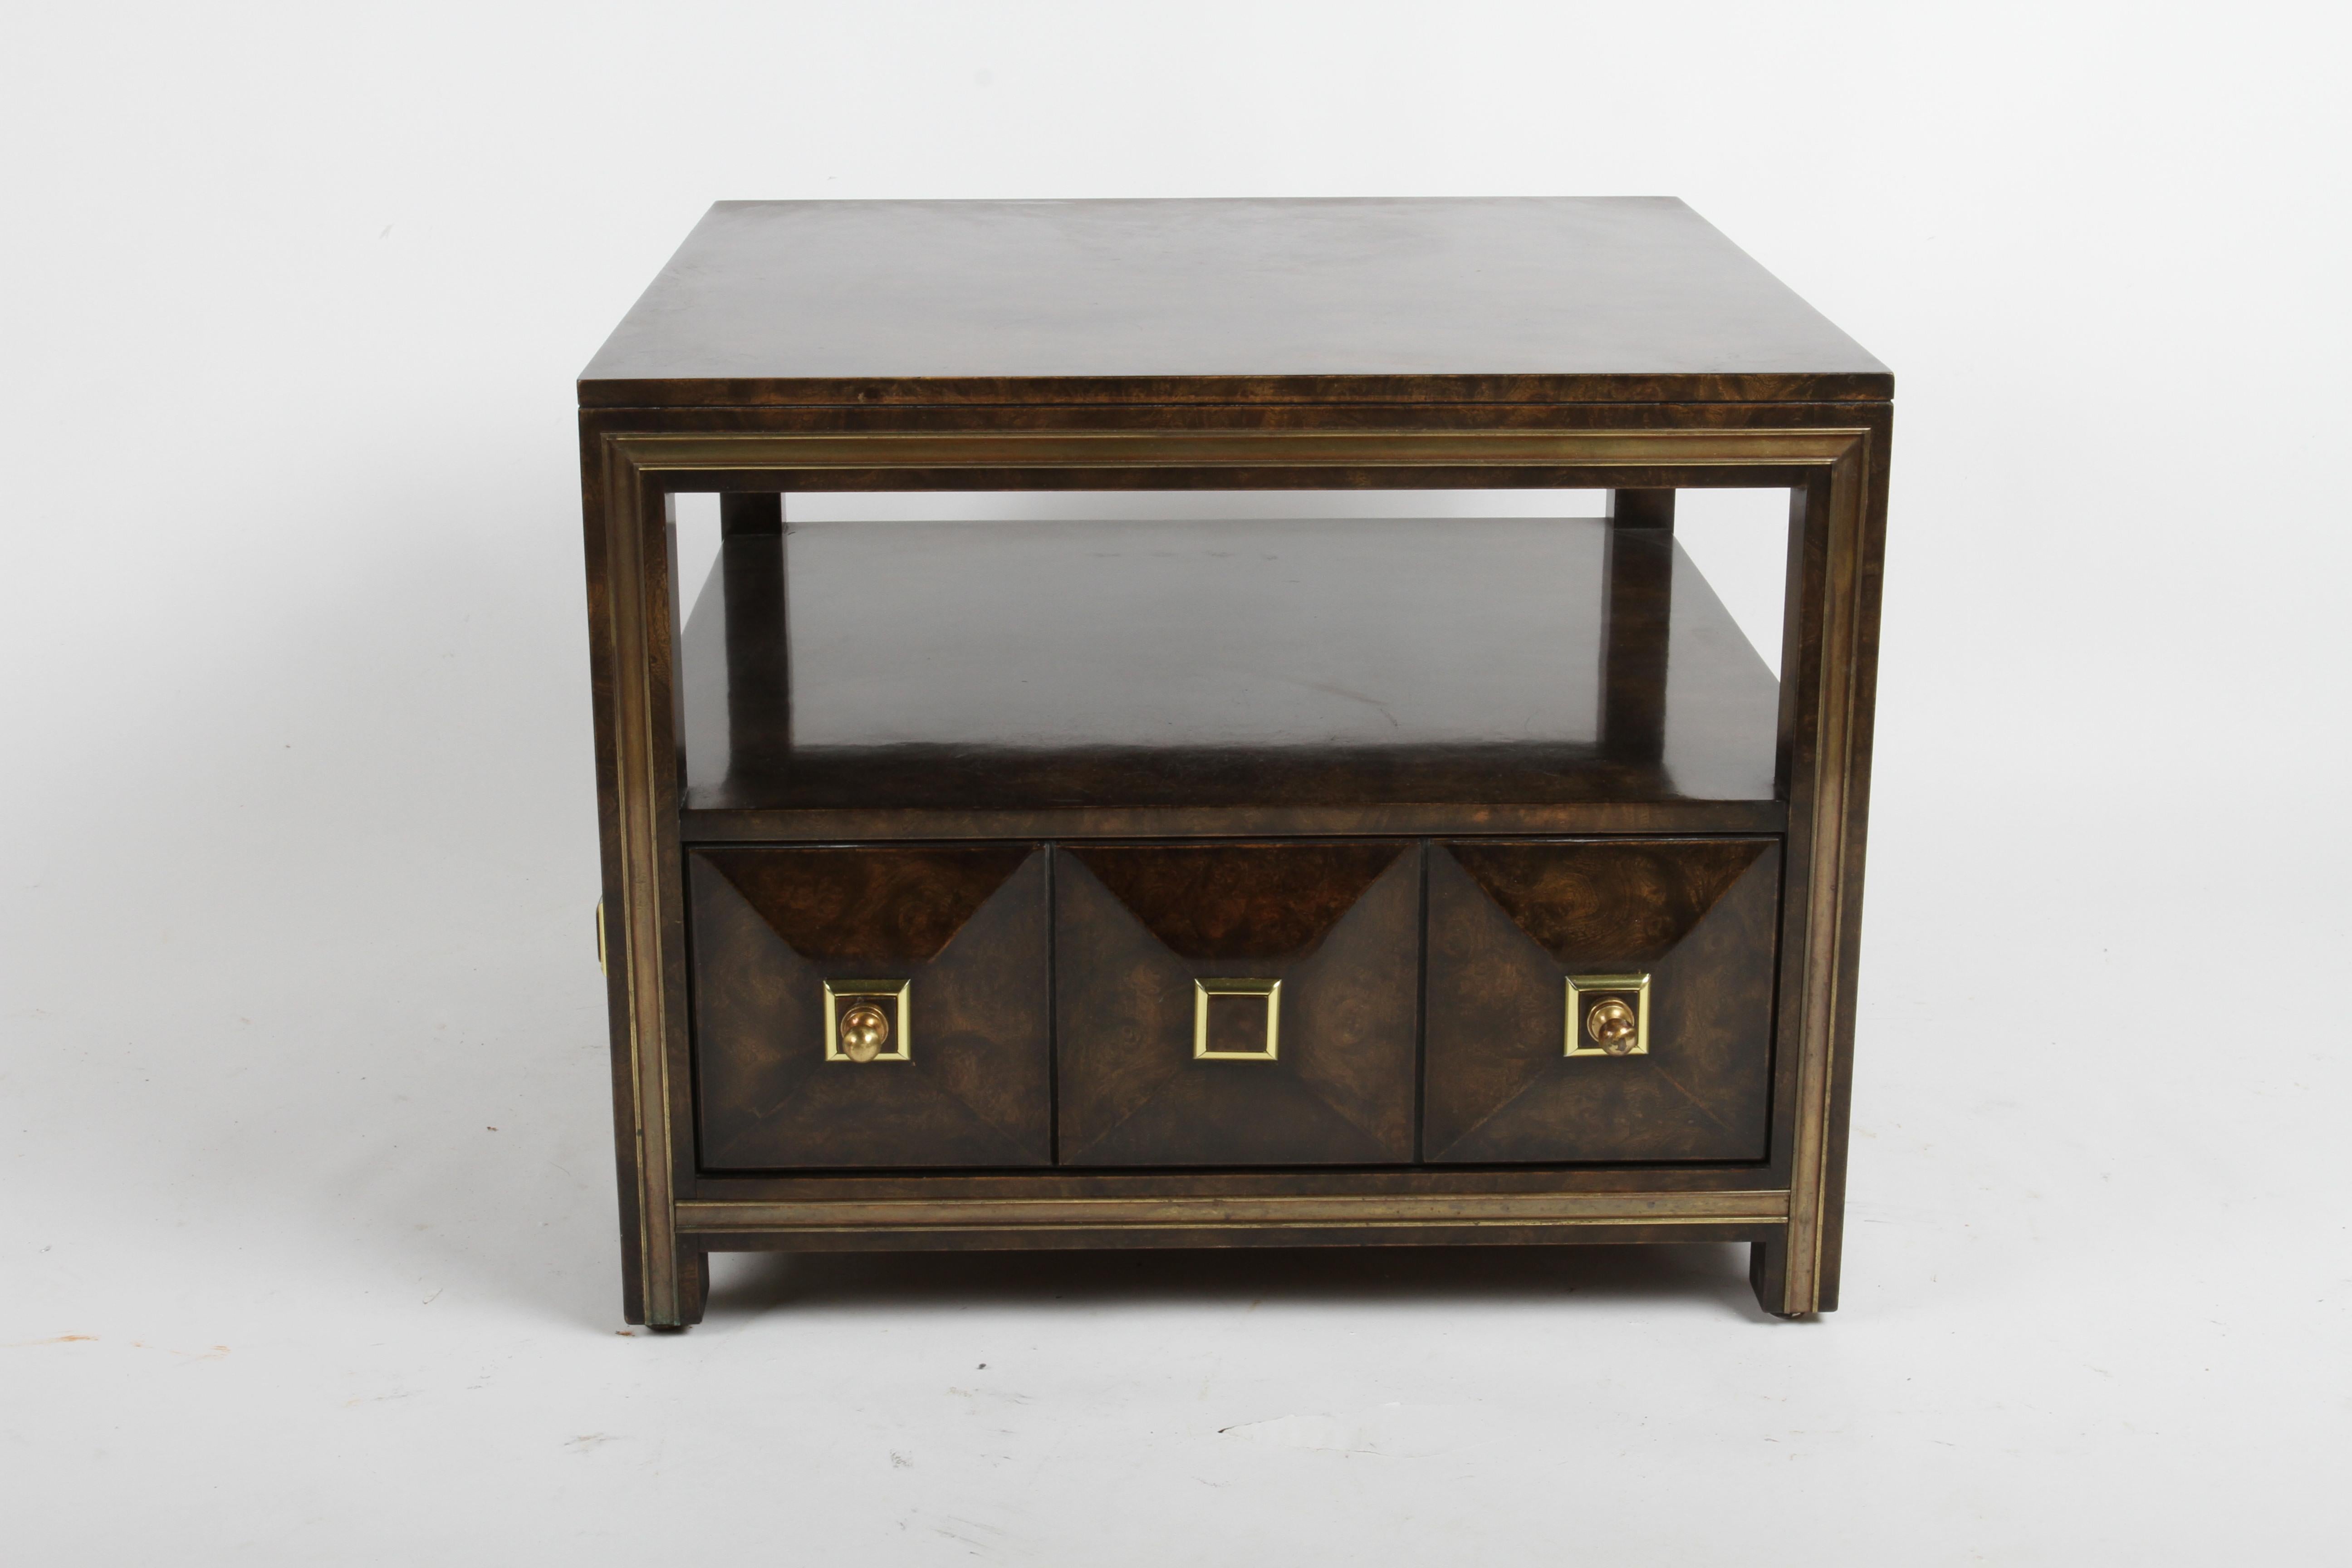 Pair of Large Mastercraft Burl Elm & Brass End Tables or Night Stands w/ Drawers In Good Condition For Sale In St. Louis, MO